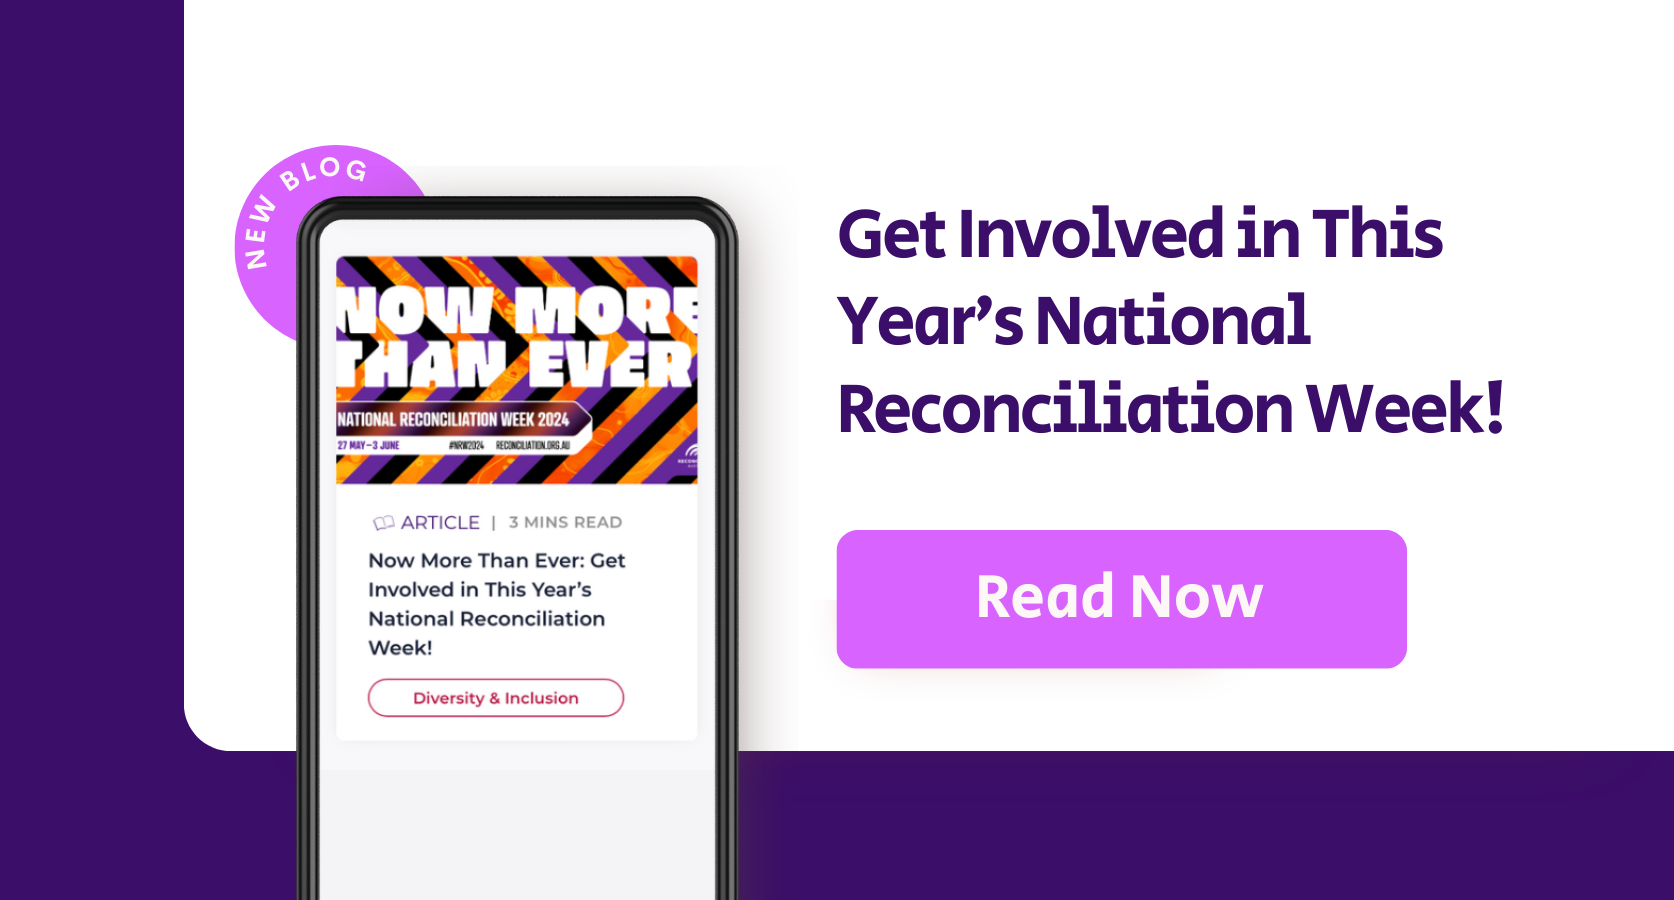 Read our latest blog: Get Involved in This Year's National Reconciliation Week